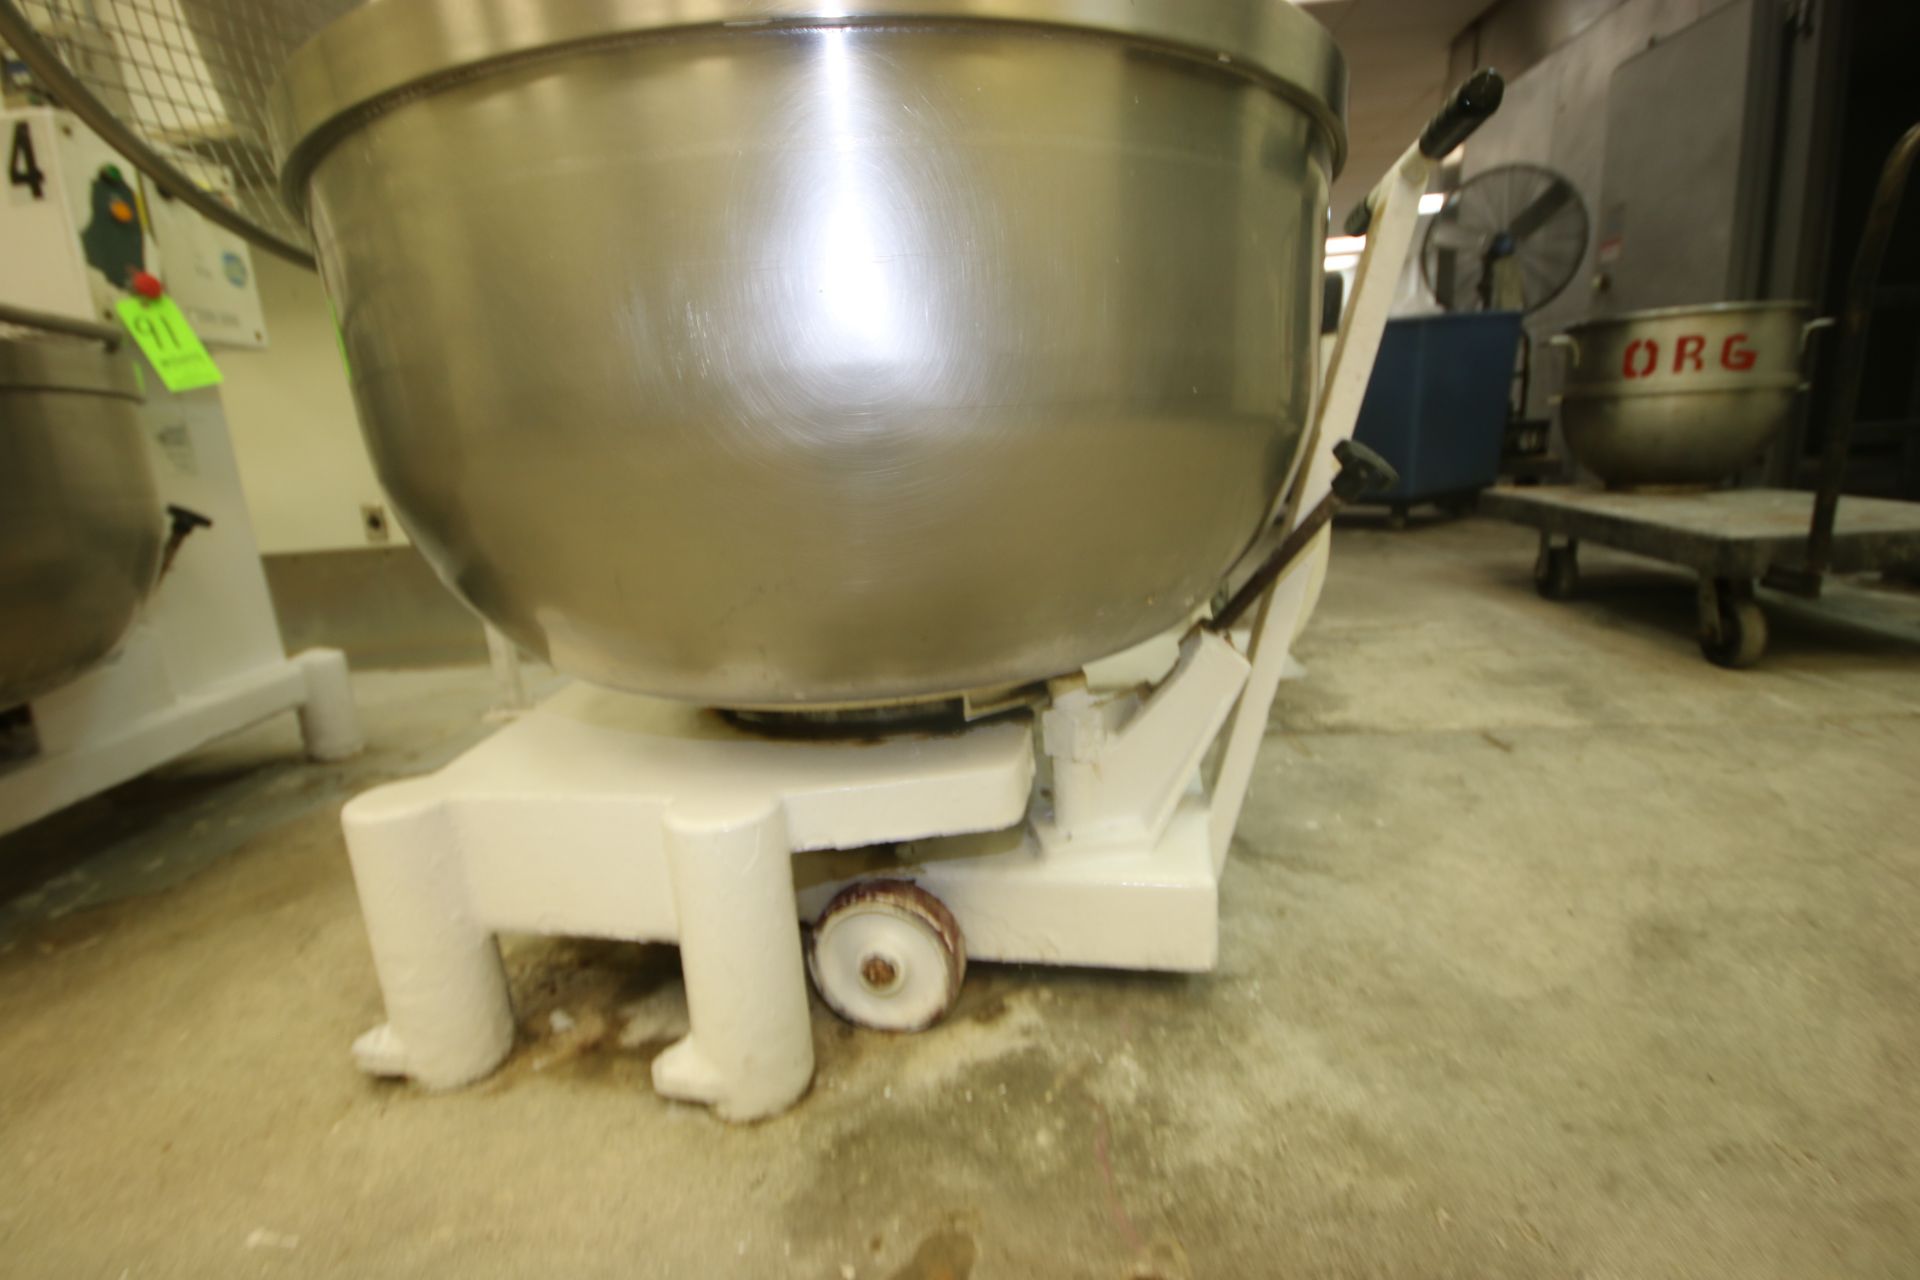 VMI Phebus 2000 Dough Mixer, M/N 2330 MAL, S/N 131206, 208 Volts, Bowl Separates From Mixer--See - Image 3 of 6